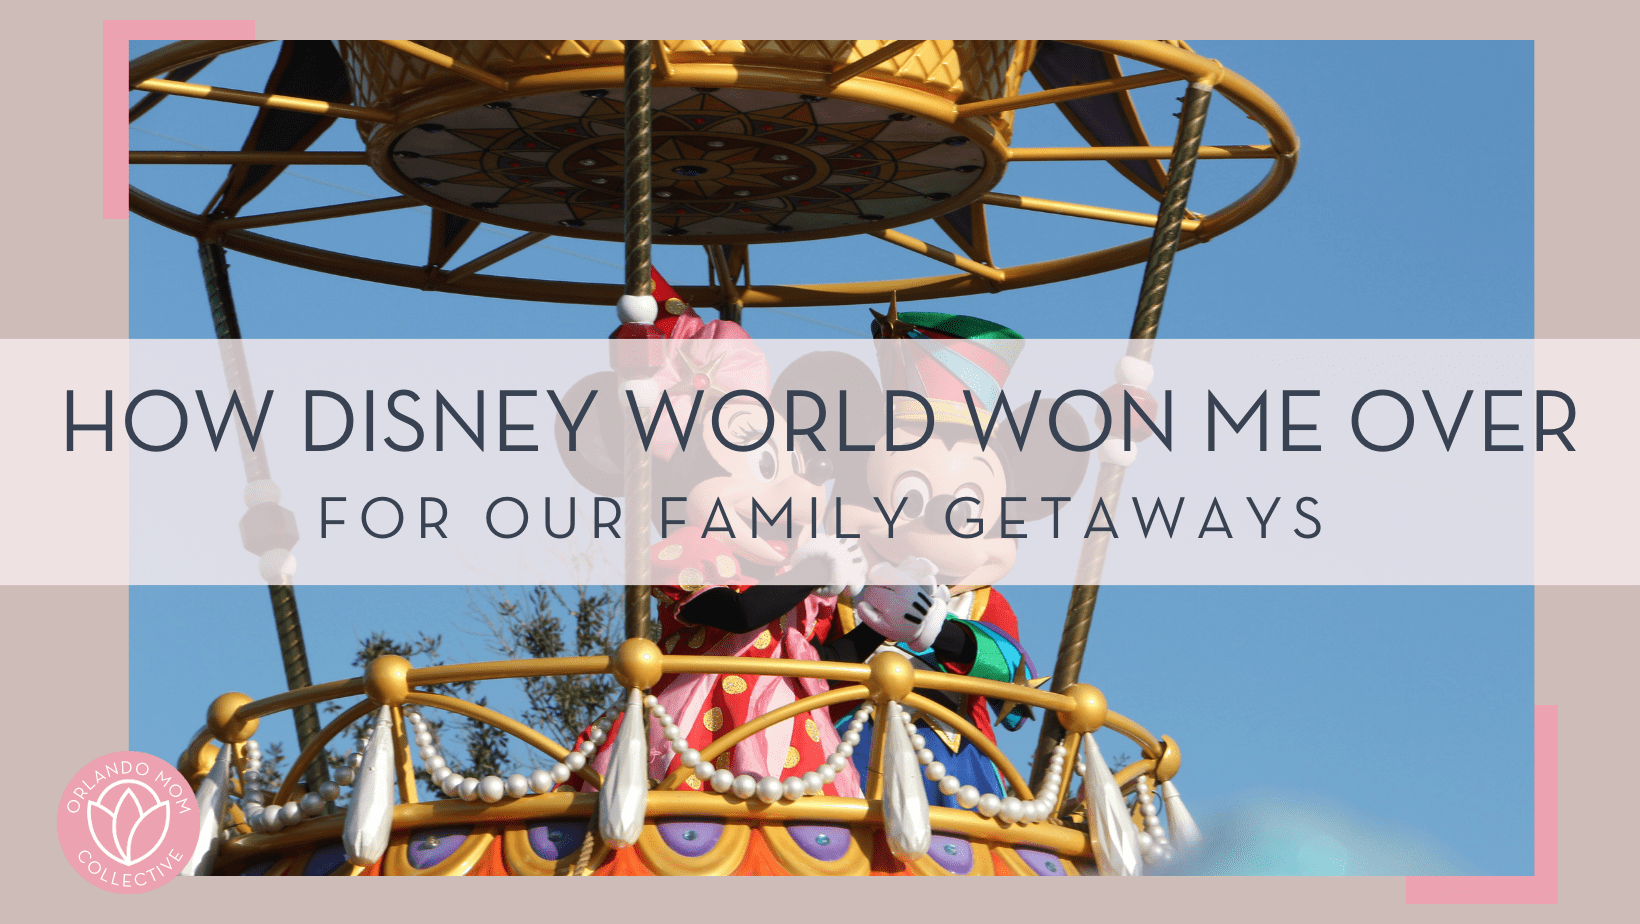 hector vasquez via unsplash image of mickey and Minnie in the parade with 'how Disney World won me over for our family getaways' in text